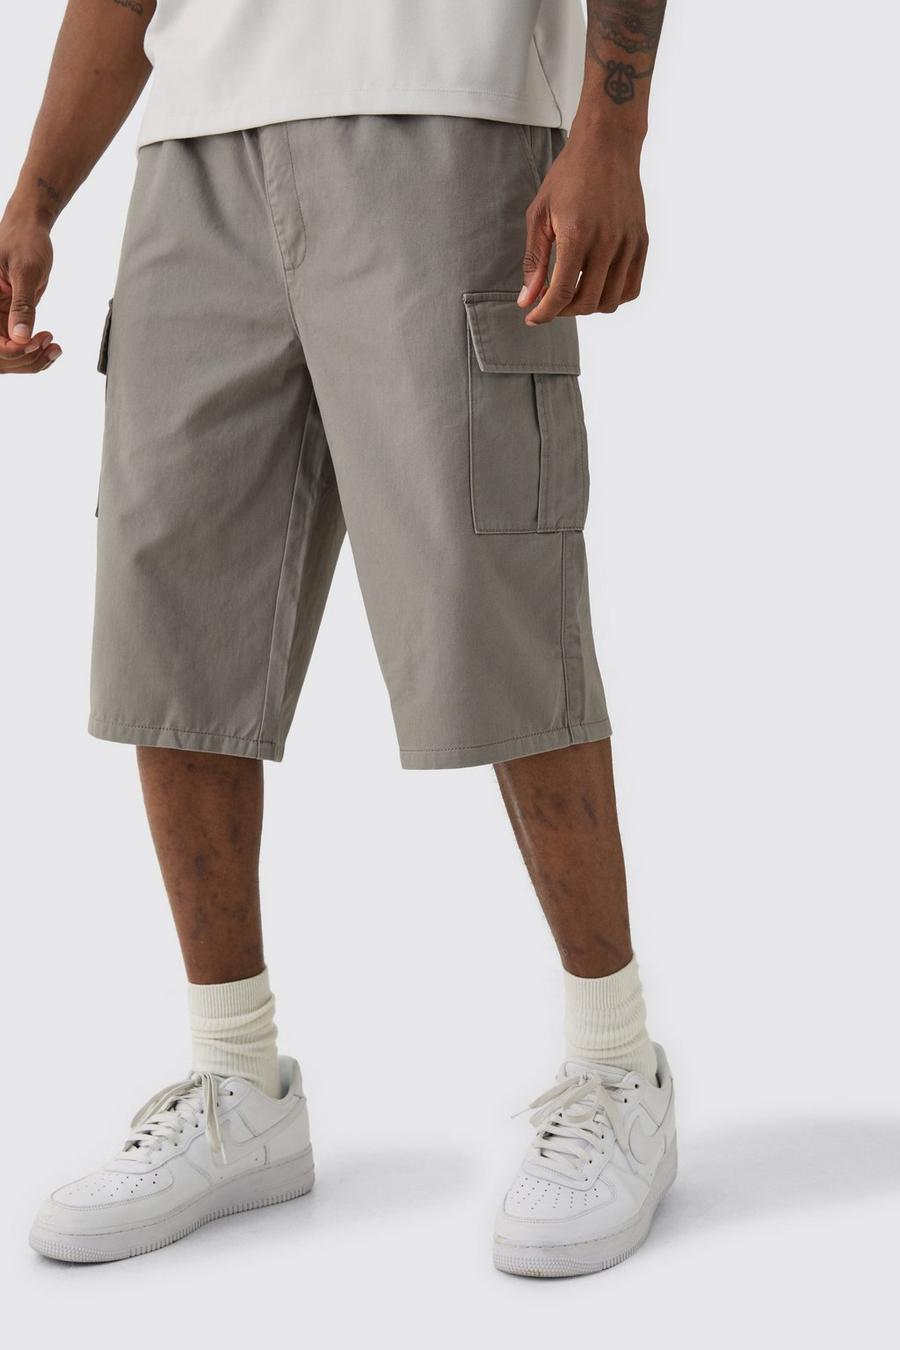 Grey Tall Elasticated Waist Relaxed Fit Cargo Jorts